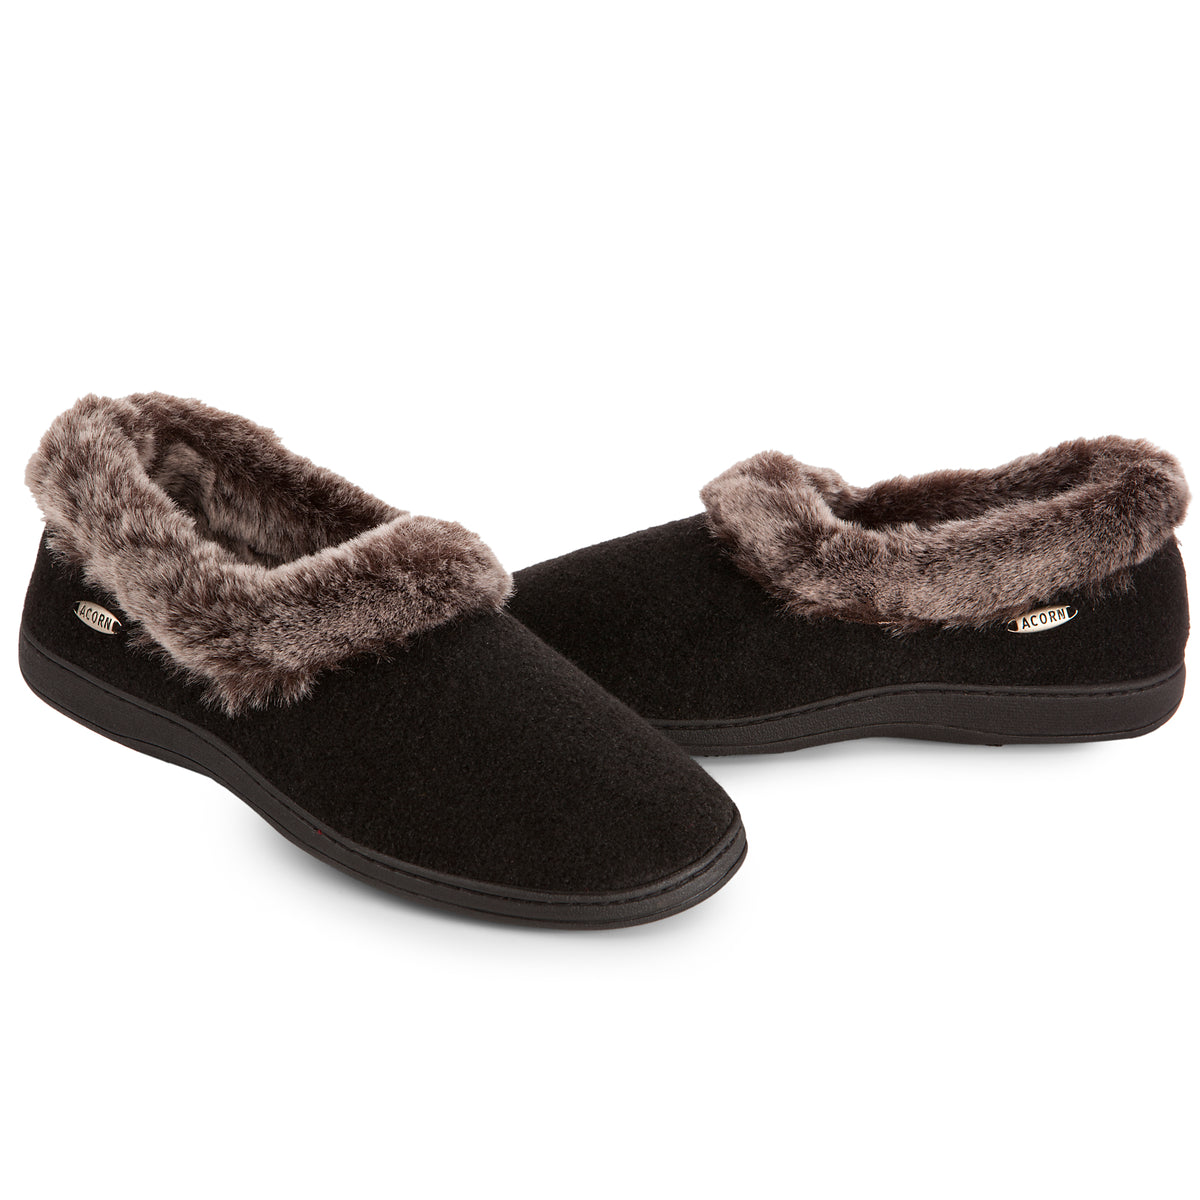 Women's Faux Fur Collar Slippers in Black both slippers